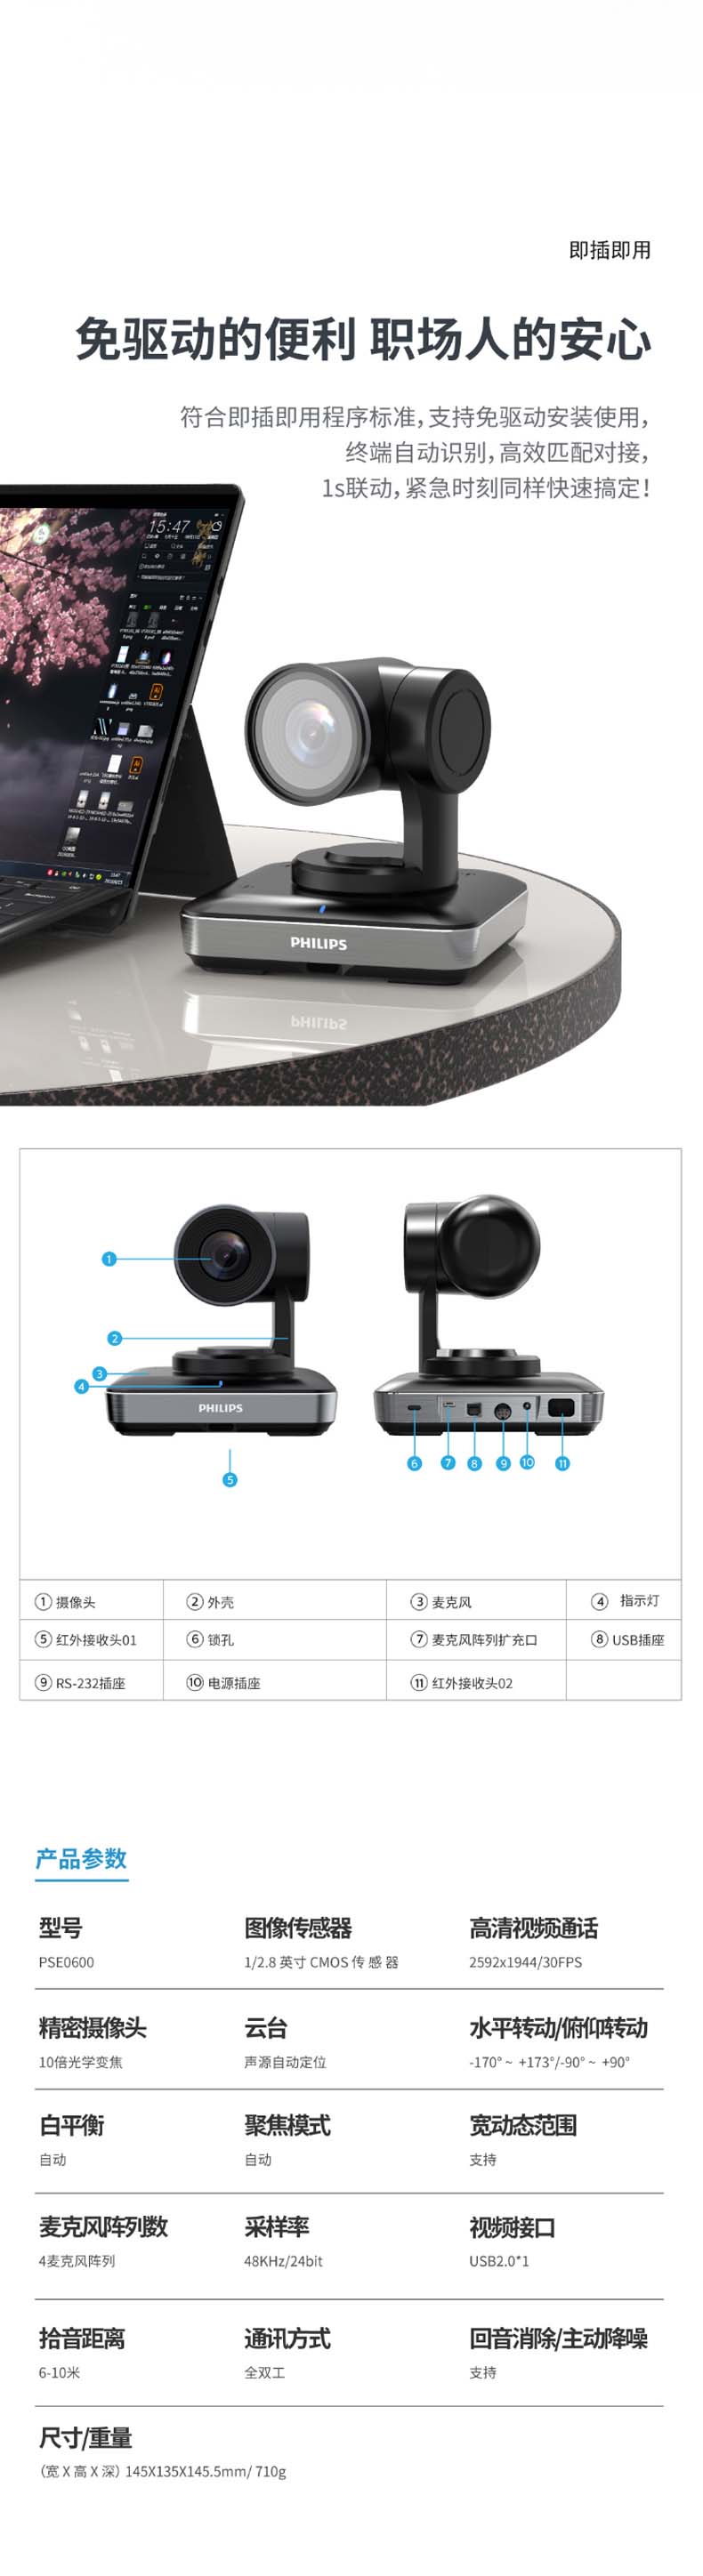 PHILIPS high-definition video conference camera PSE0600 voice positioning remote conference